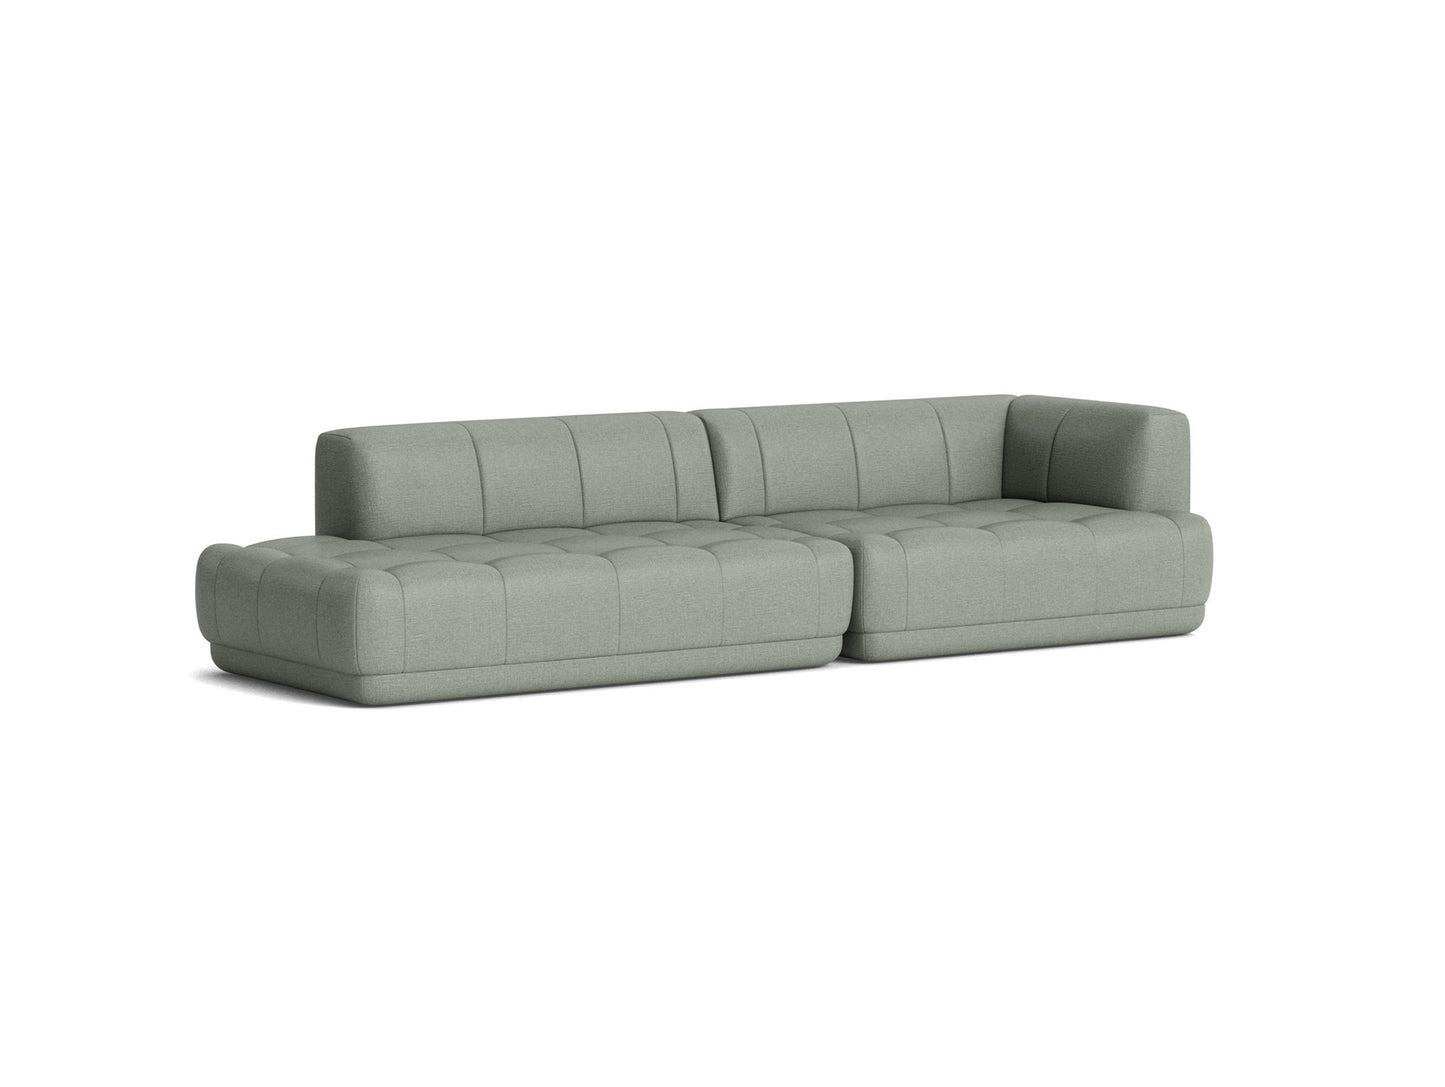 Quilton Sofa - Combination 10 by HAY - Right Armrest / Roden 08